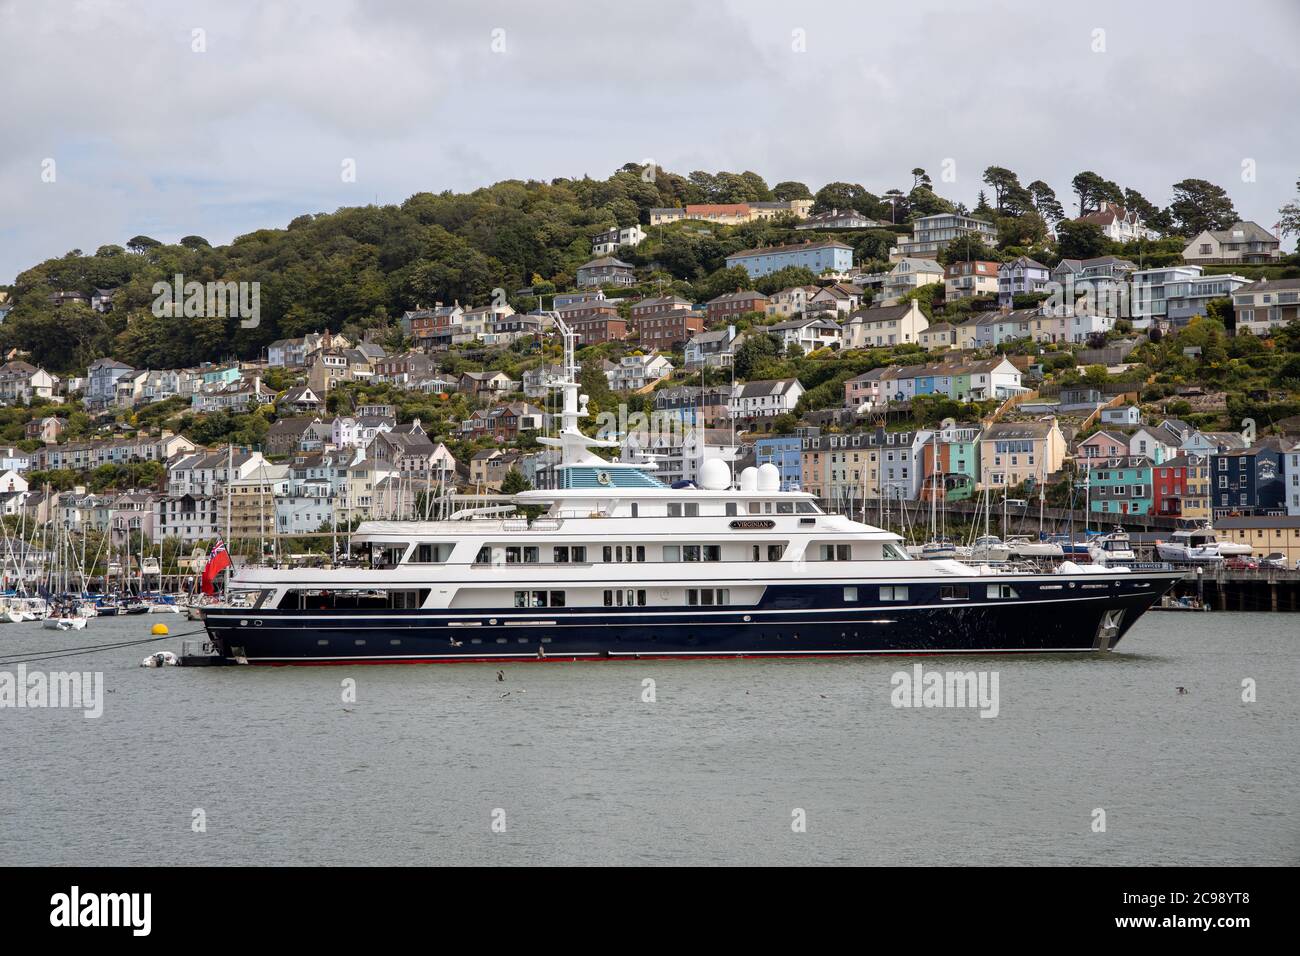 Virginian Superyacht, owned by Lord Anthony Bamford, moored in the River Dart, Dartmouth Stock Photo